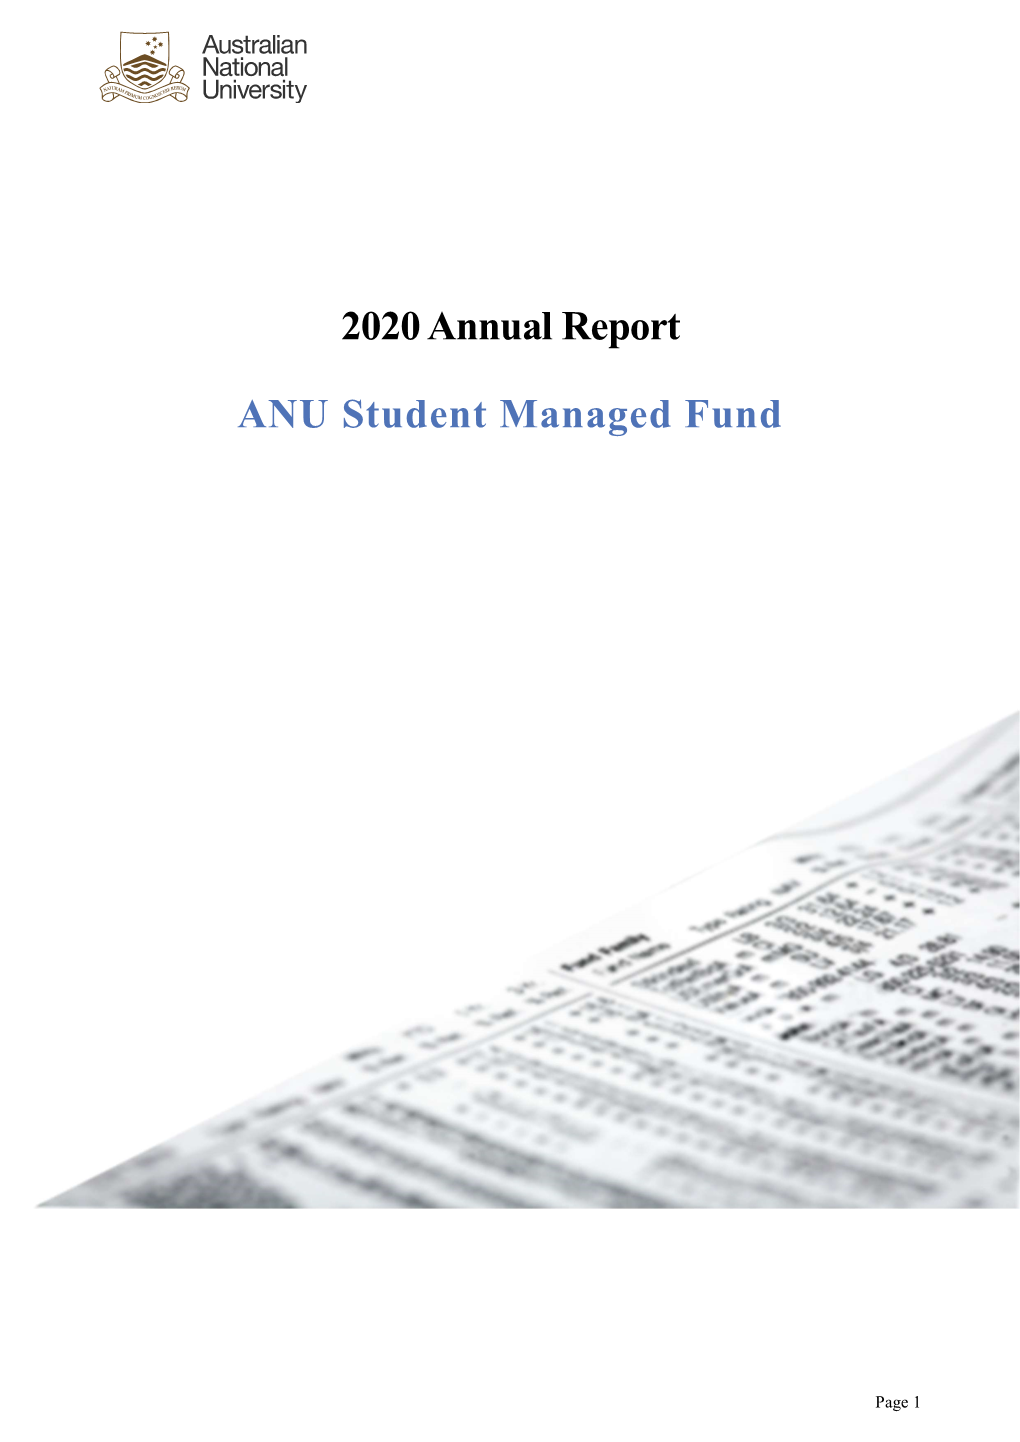 2020 Annual Report ANU Student Managed Fund